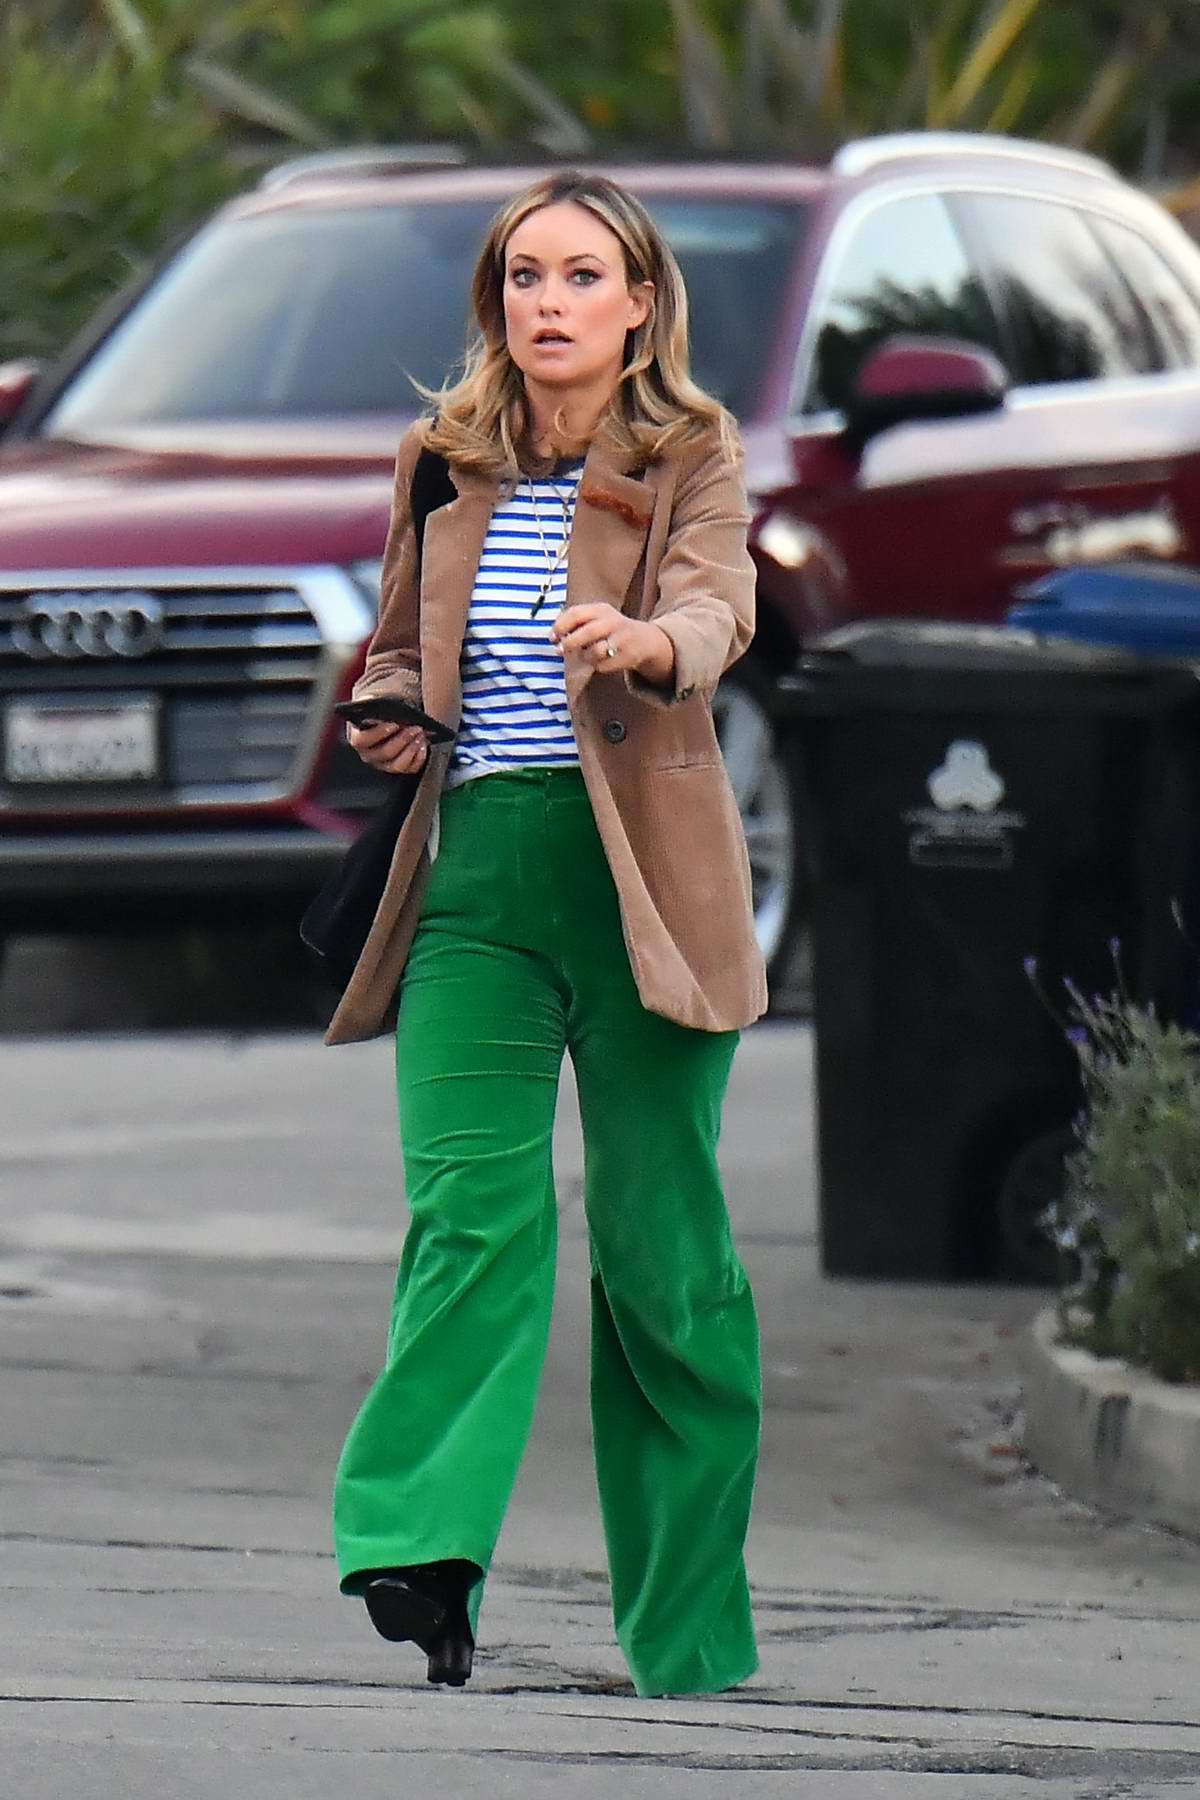 Olivia Wilde looks great in bright green pants and brown blazer as